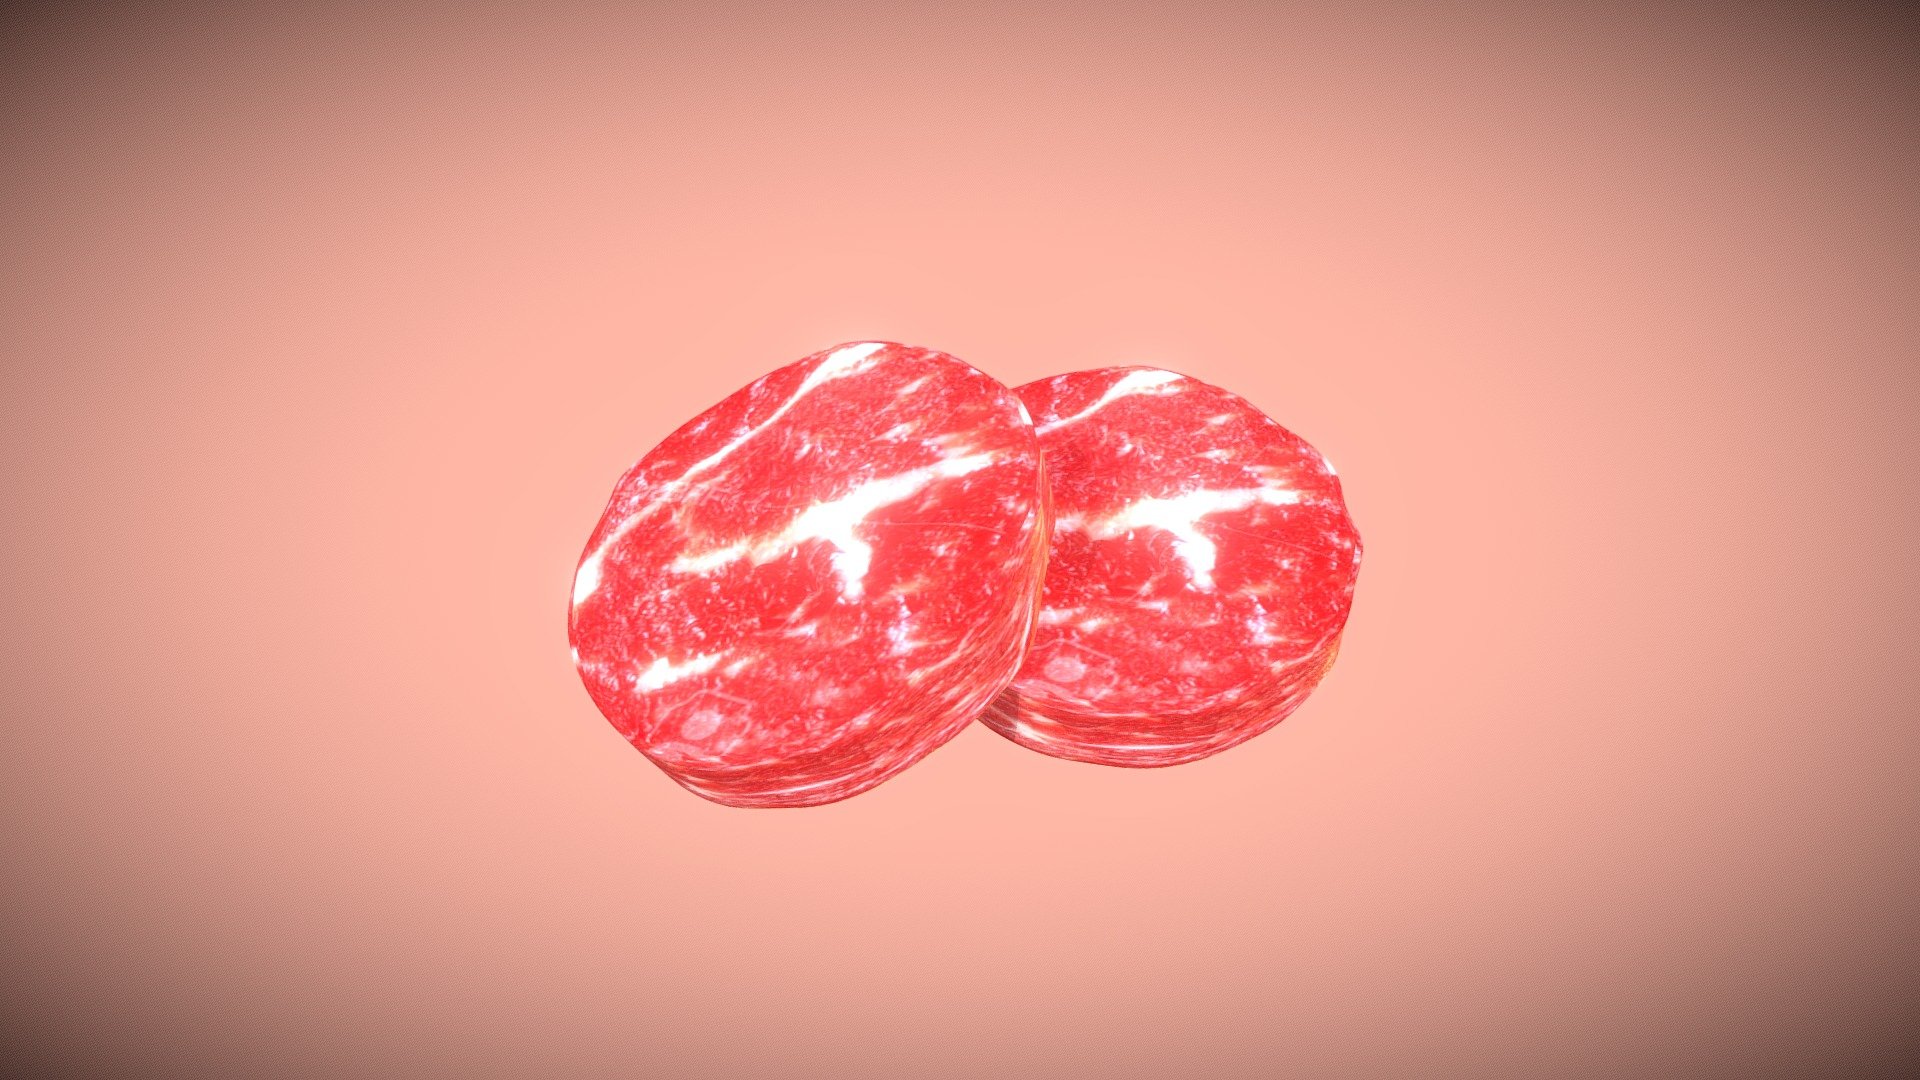 Meat - 11th Day Challenge, #3December2020

Model made in Blender.

Feel free to ask for format conversion or any other request 3d model